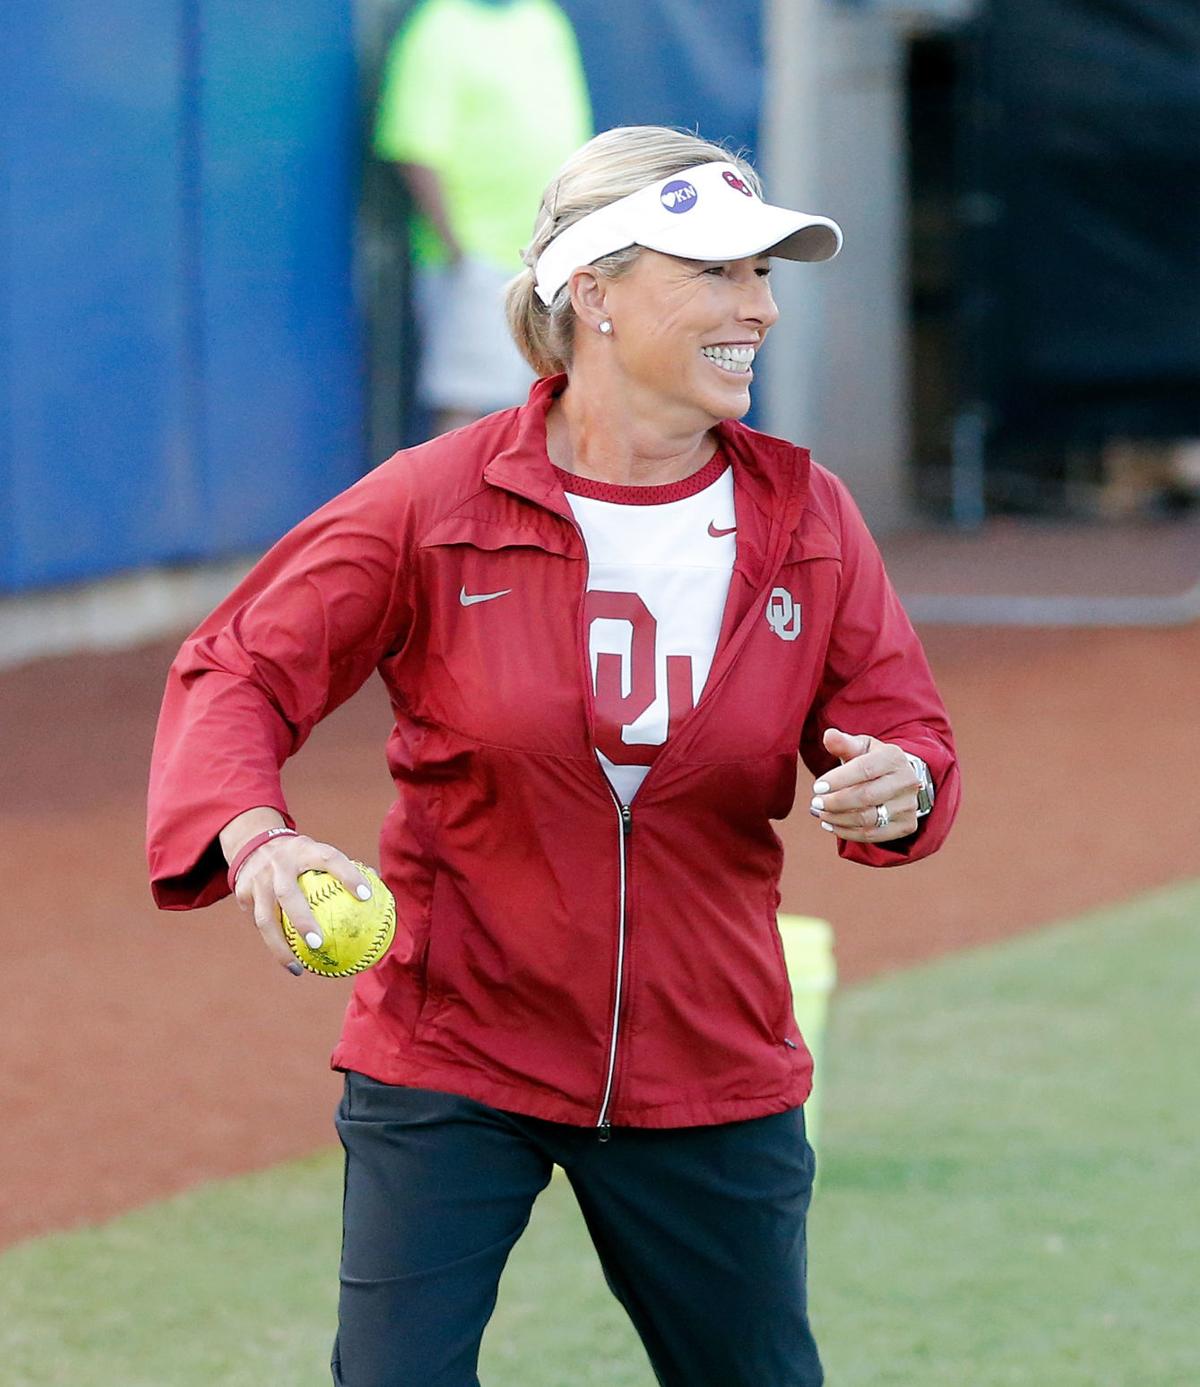 OU softball: A new $22 million softball stadium appears in the works at Oklahoma | OU ...1200 x 1387